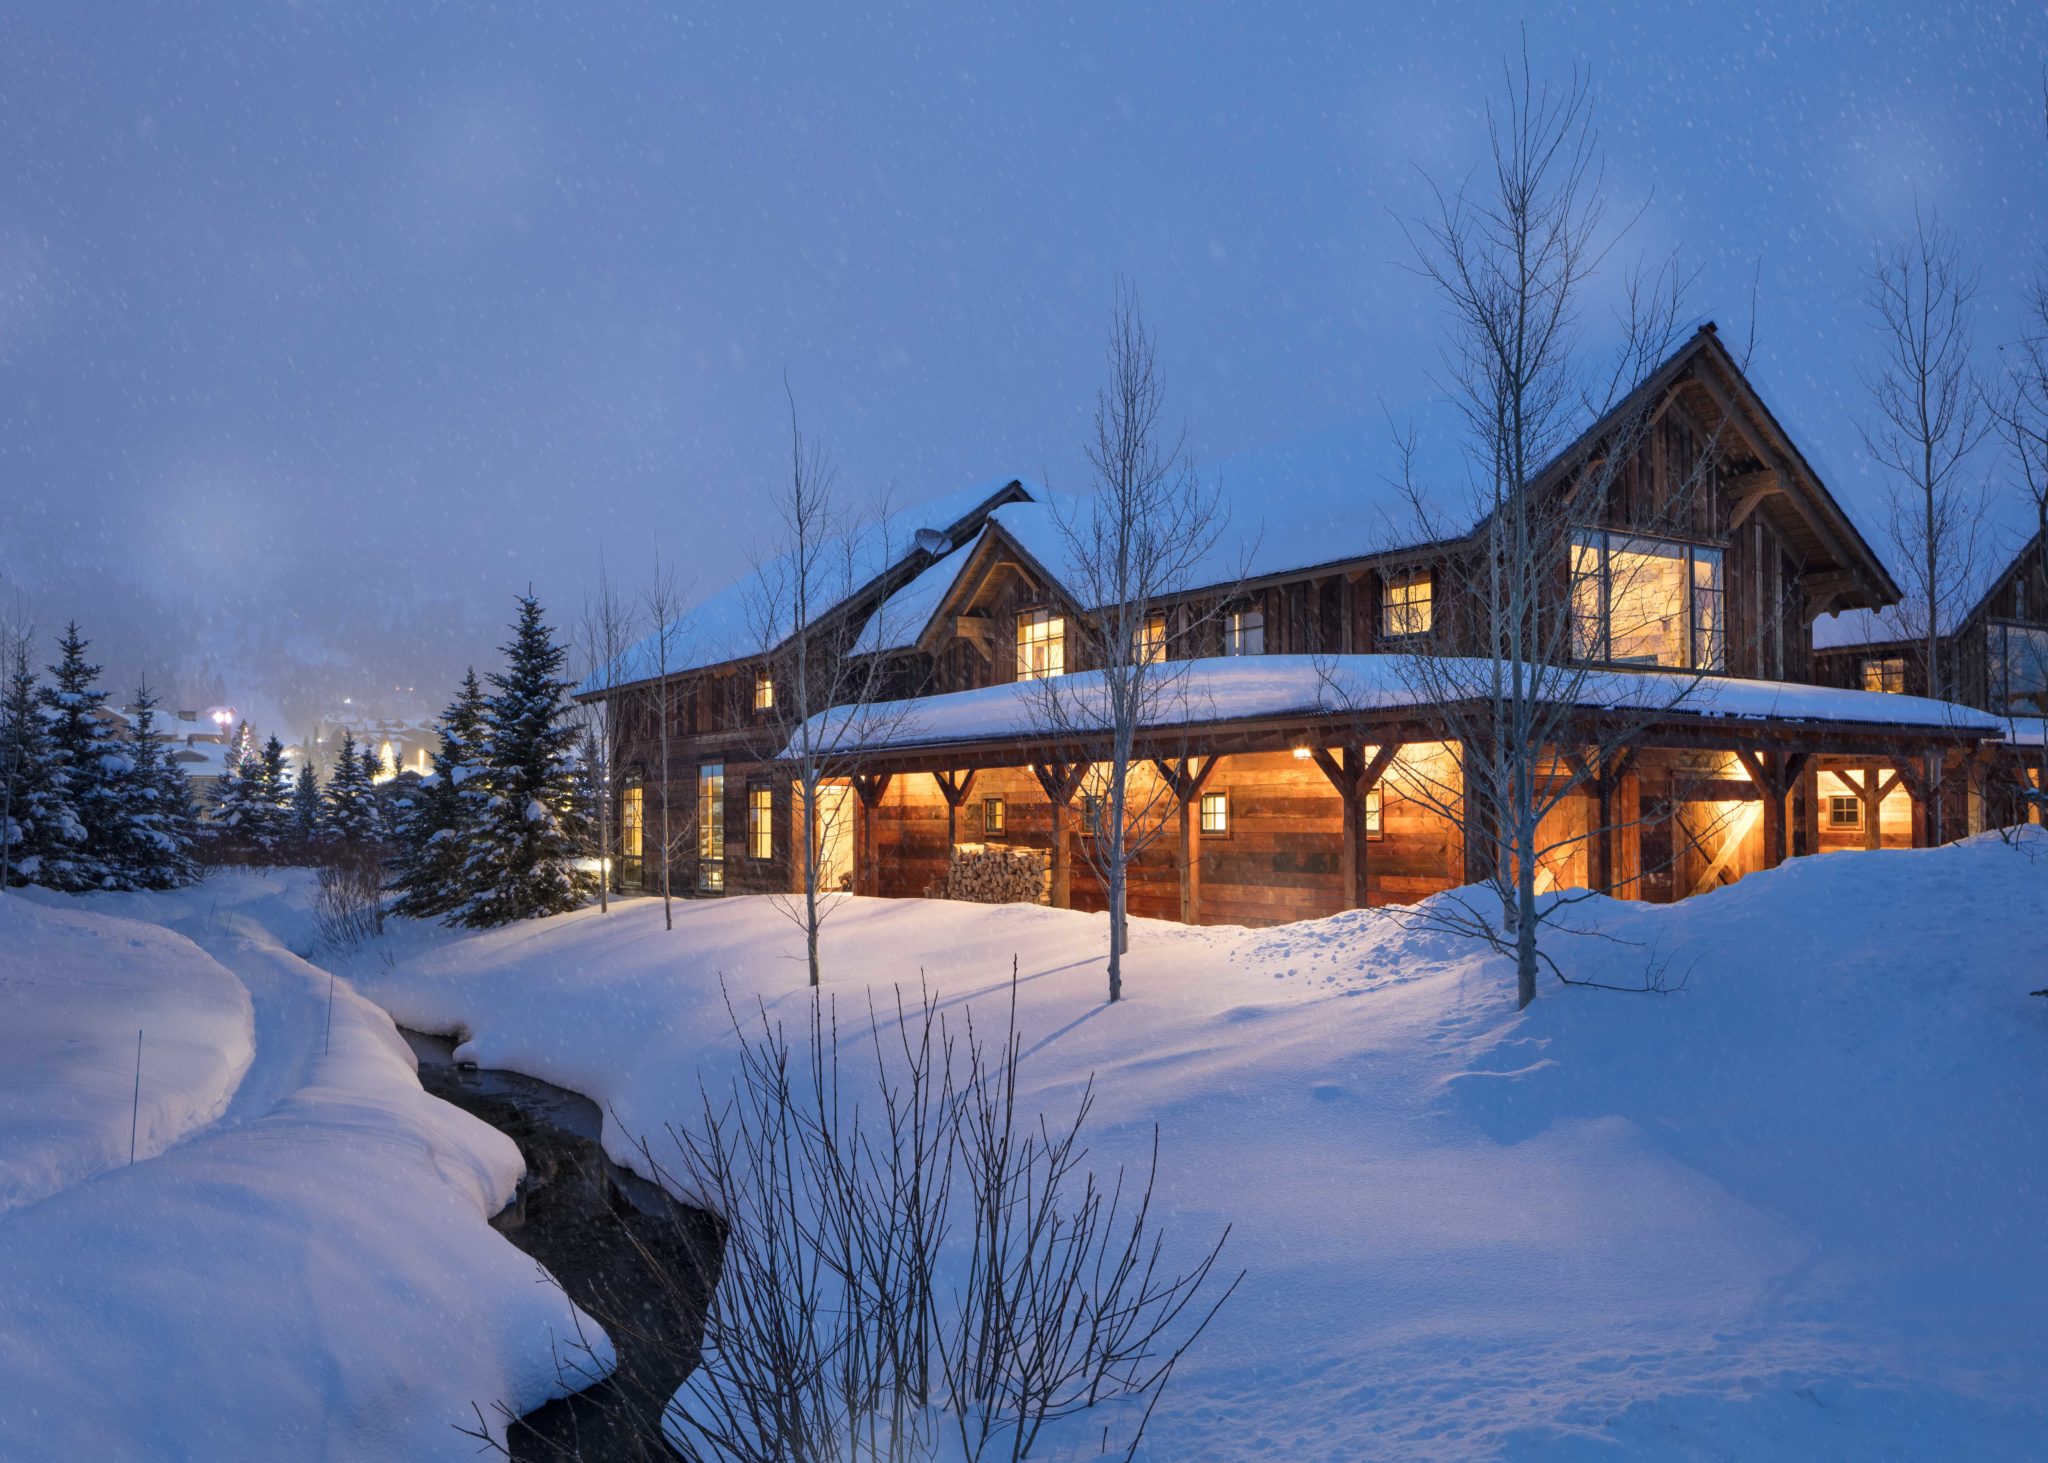 A featured Jackson Hole home is pictured, great for family vacations.